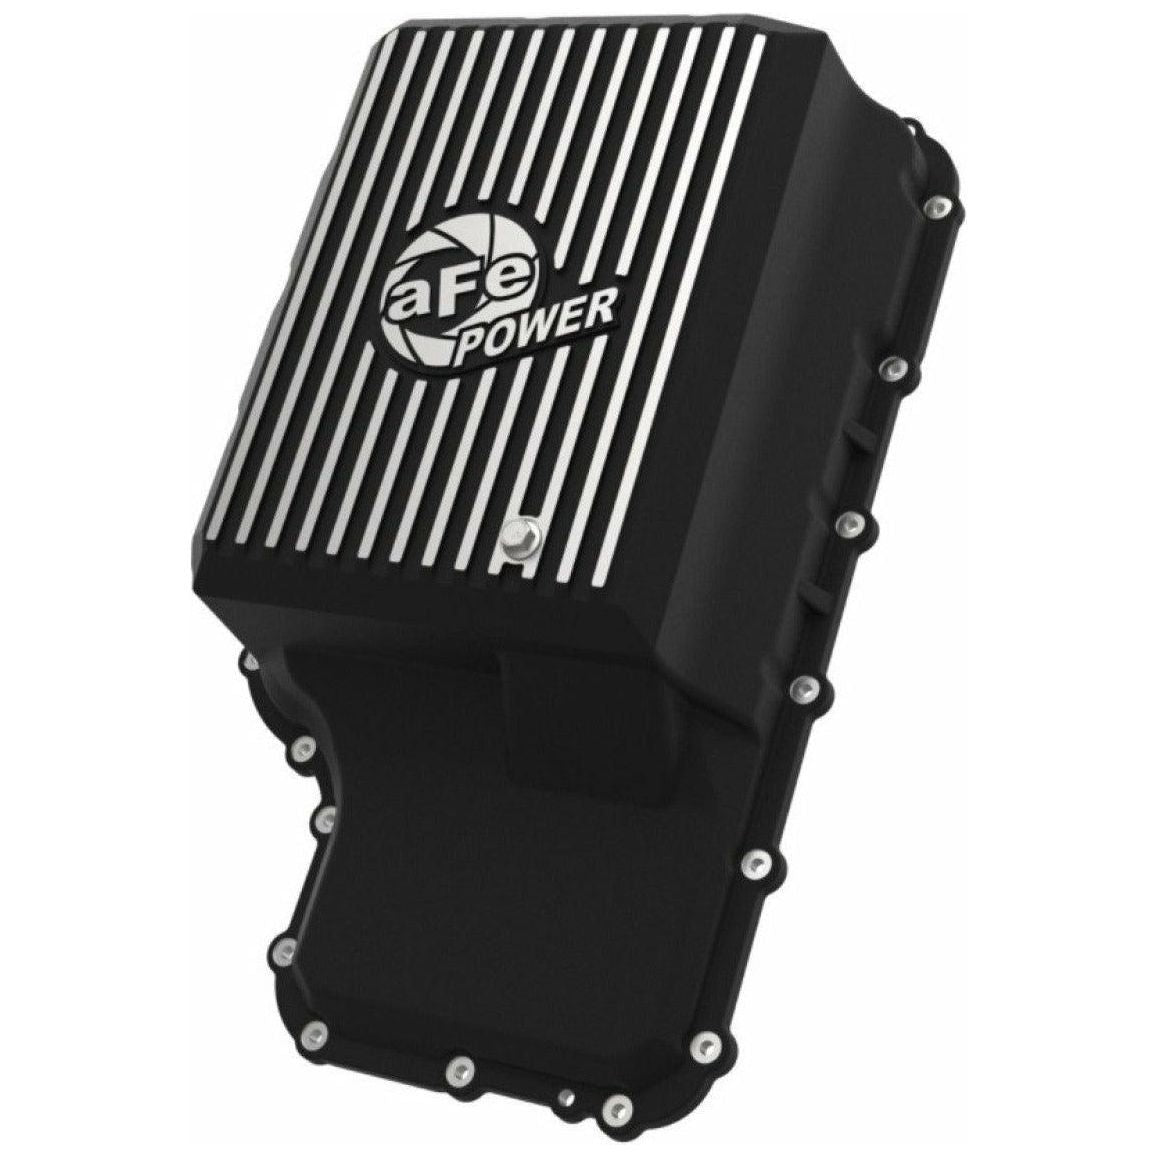 aFe 20-21 Ford Truck w/ 10R140 Transmission Pan Black POWER Street Series w/ Machined Fins - SMINKpower Performance Parts AFE46-71220B aFe